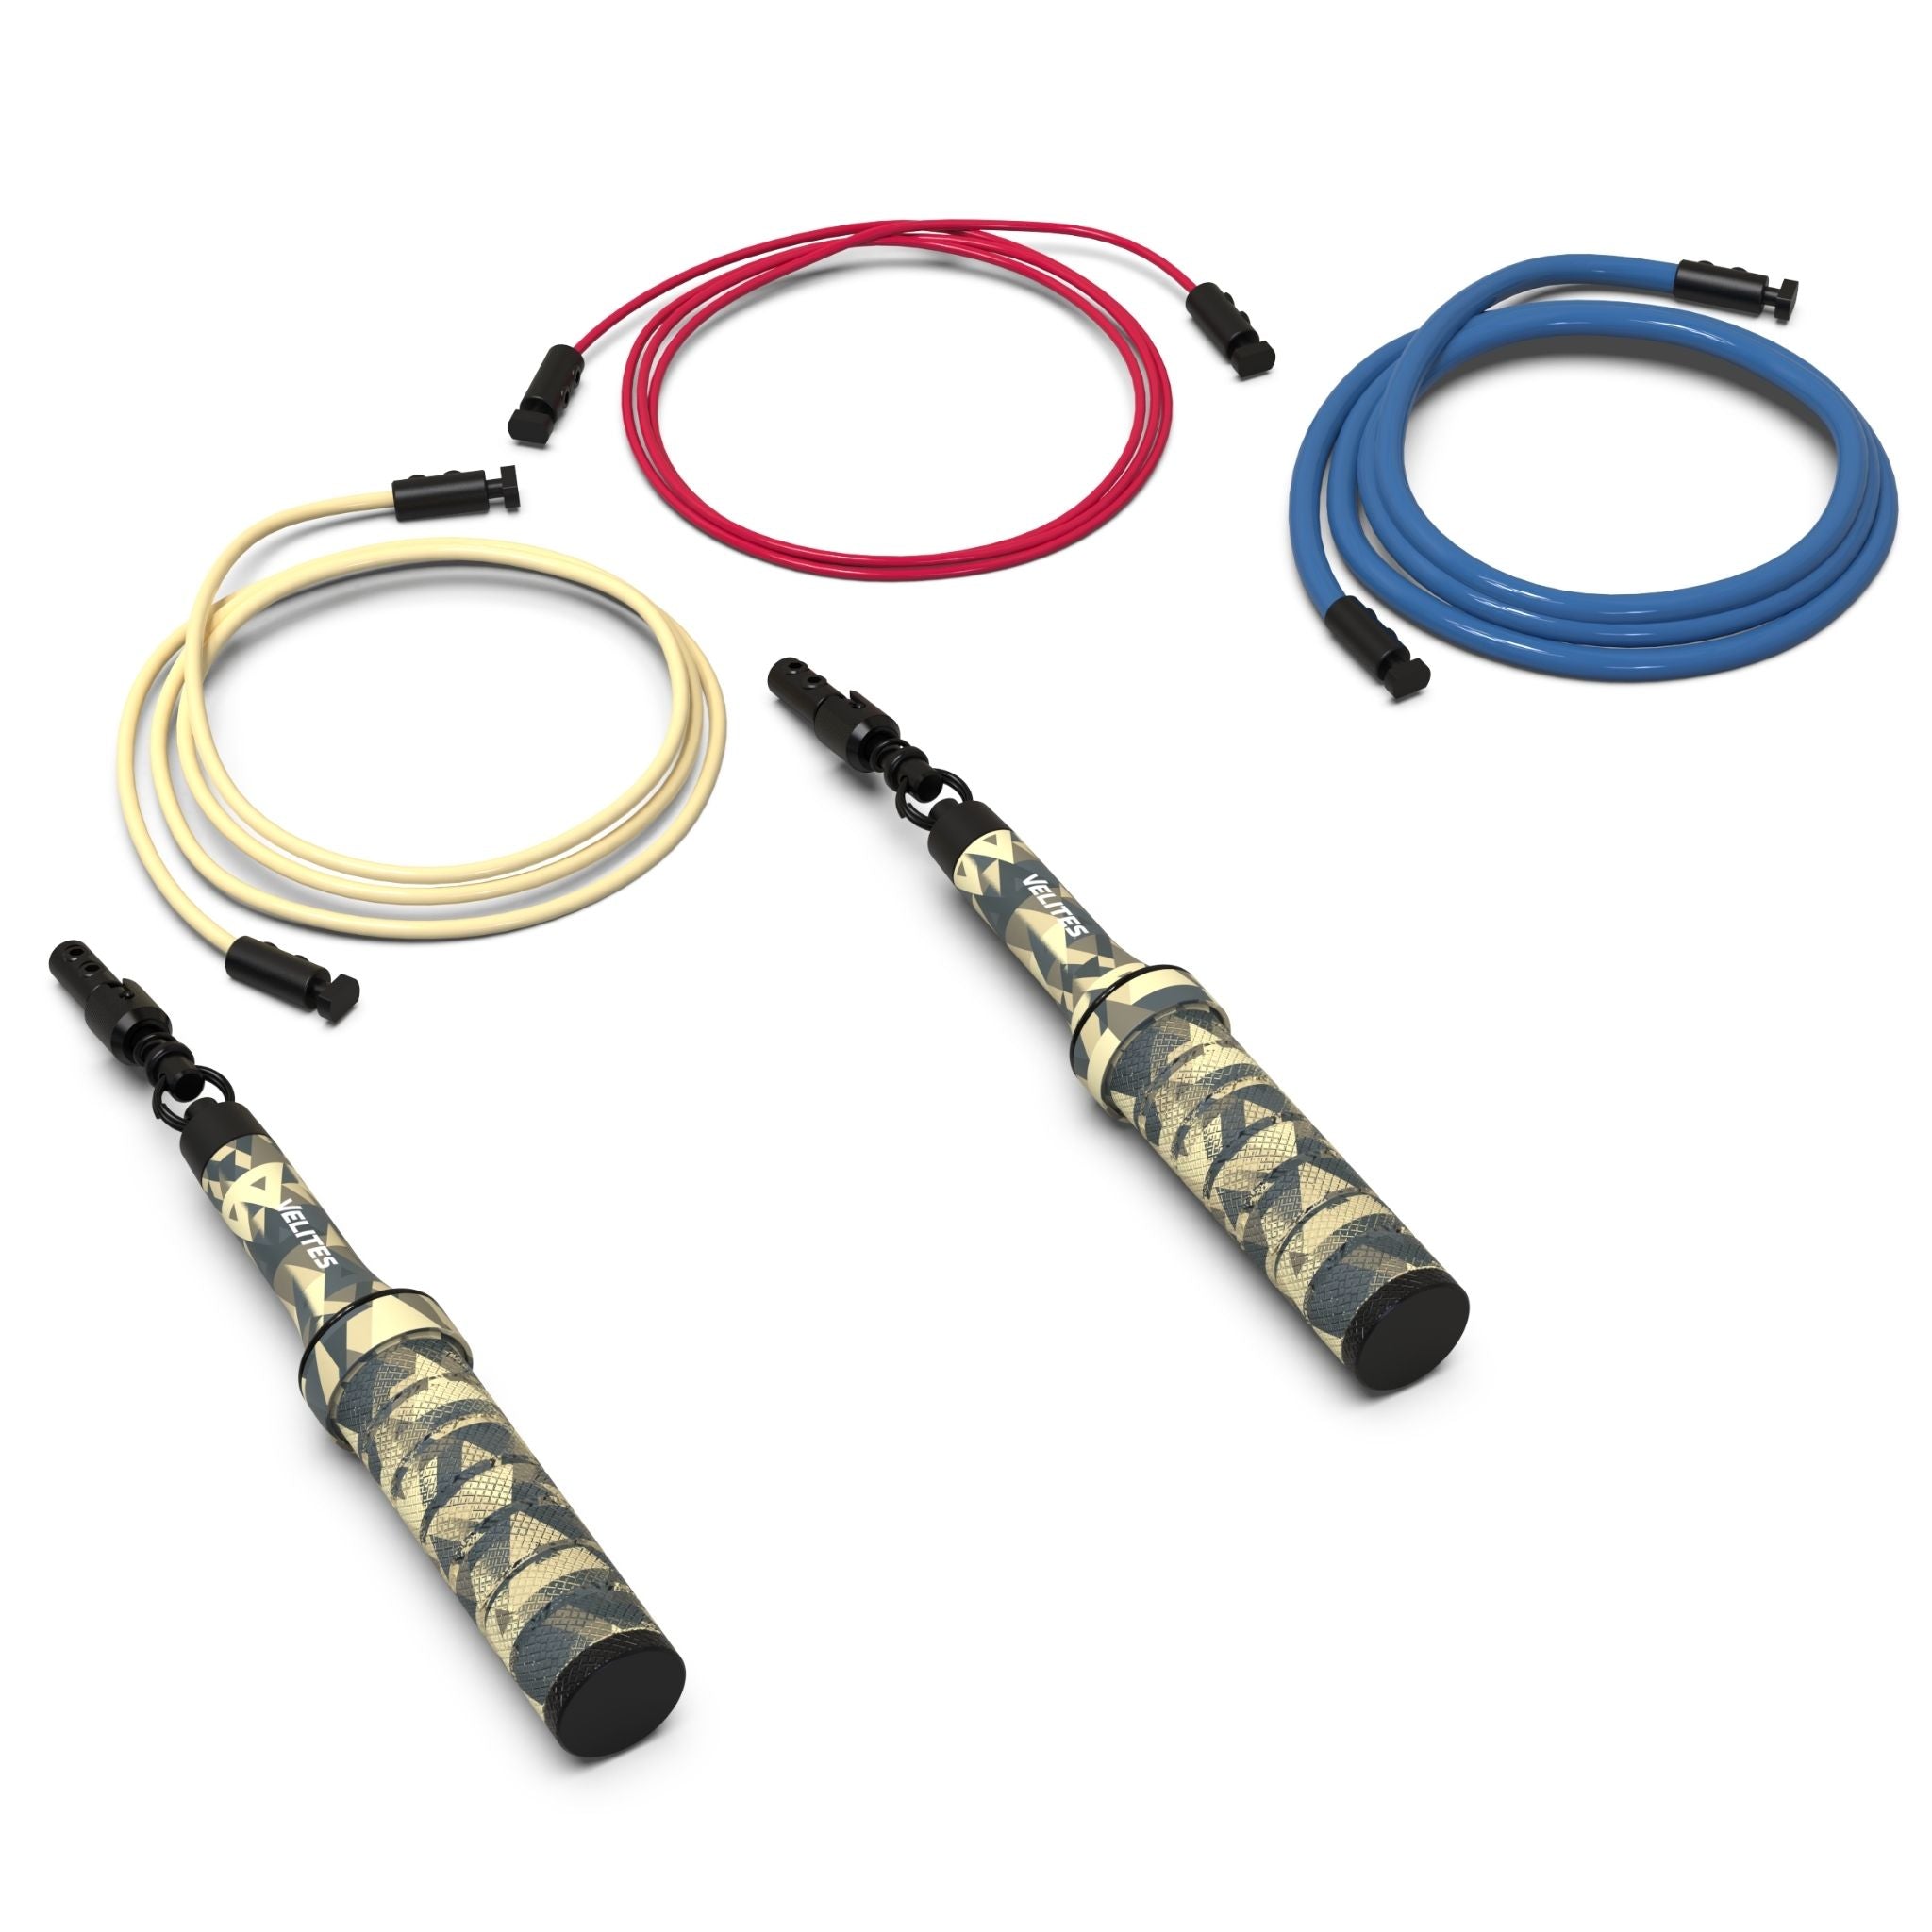 Pack Comba Earth 2.0 Velites + Cables - camuflaje - 